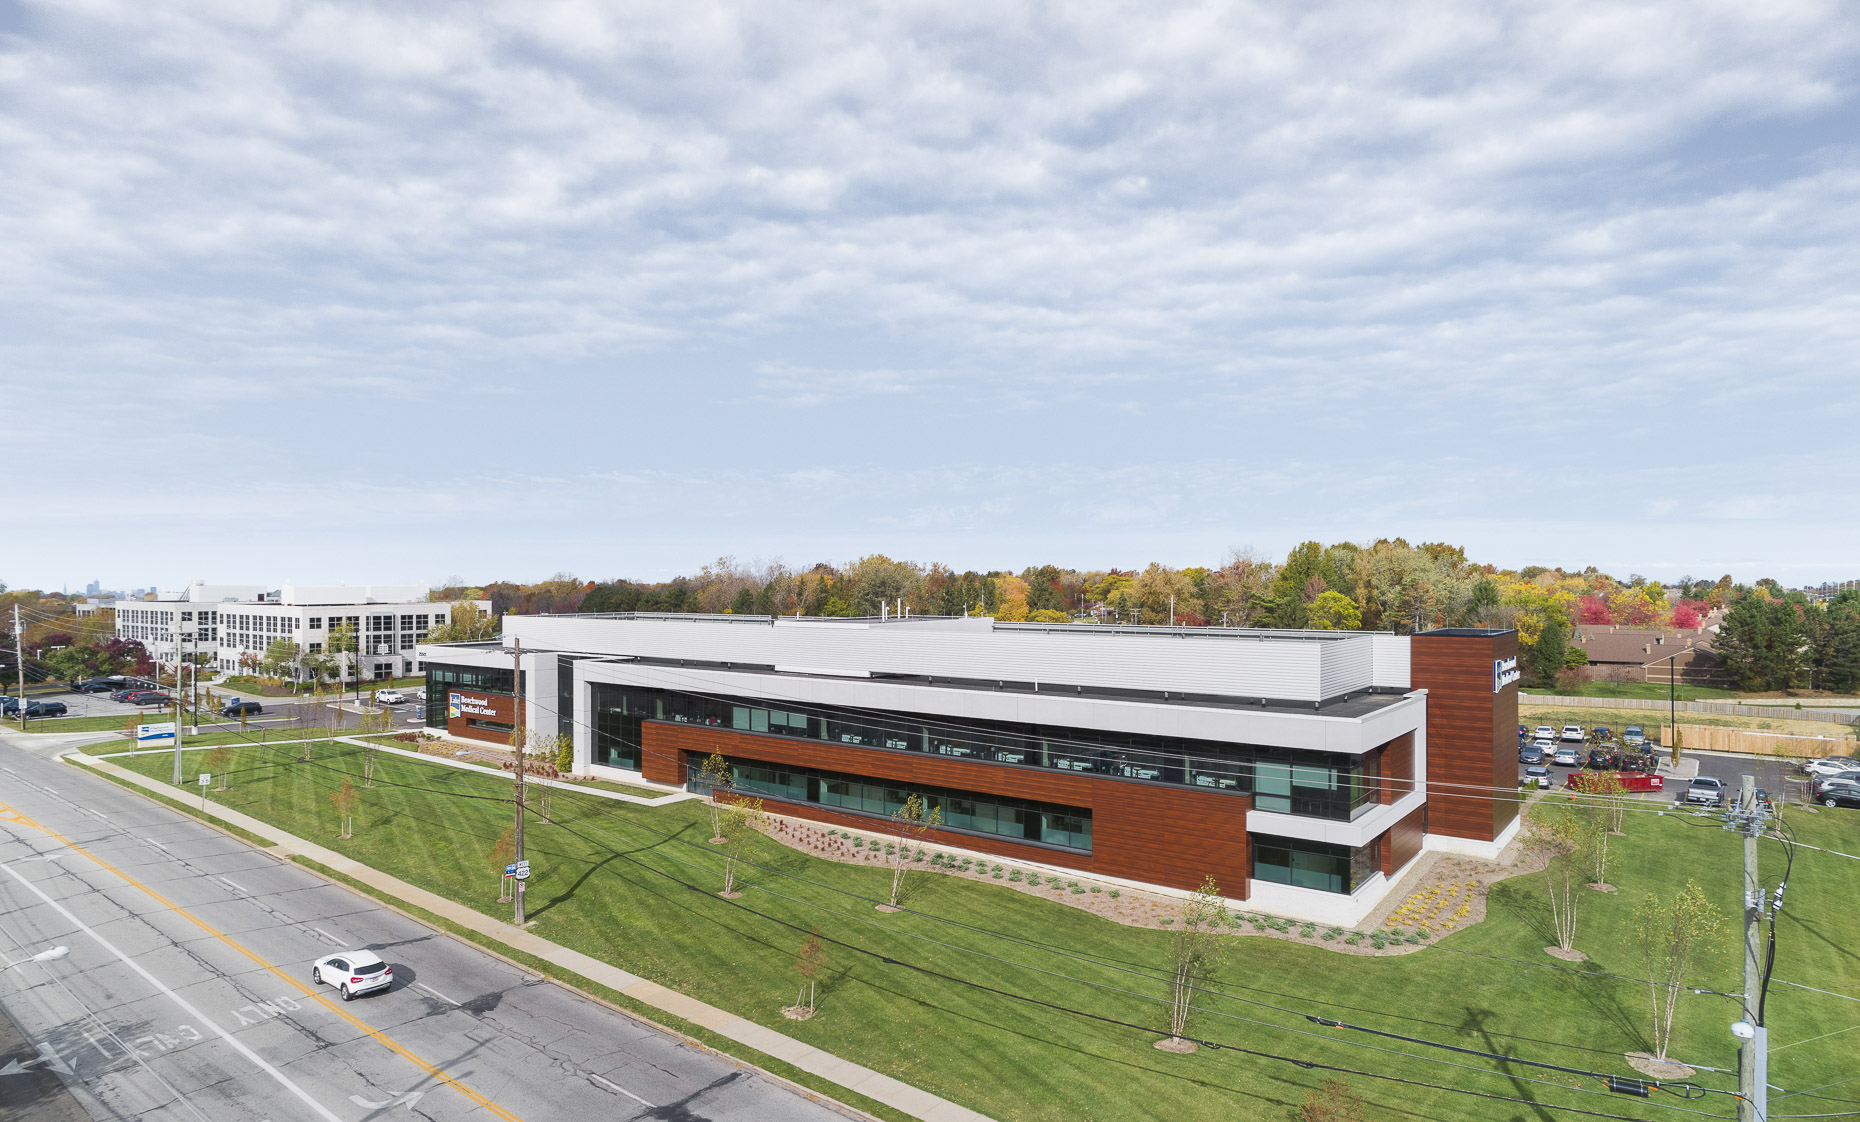 LakeHealth Beachwood Medical Center by Hasenstab Architects photographed by Lauren K Davis based in Columbus, Ohio